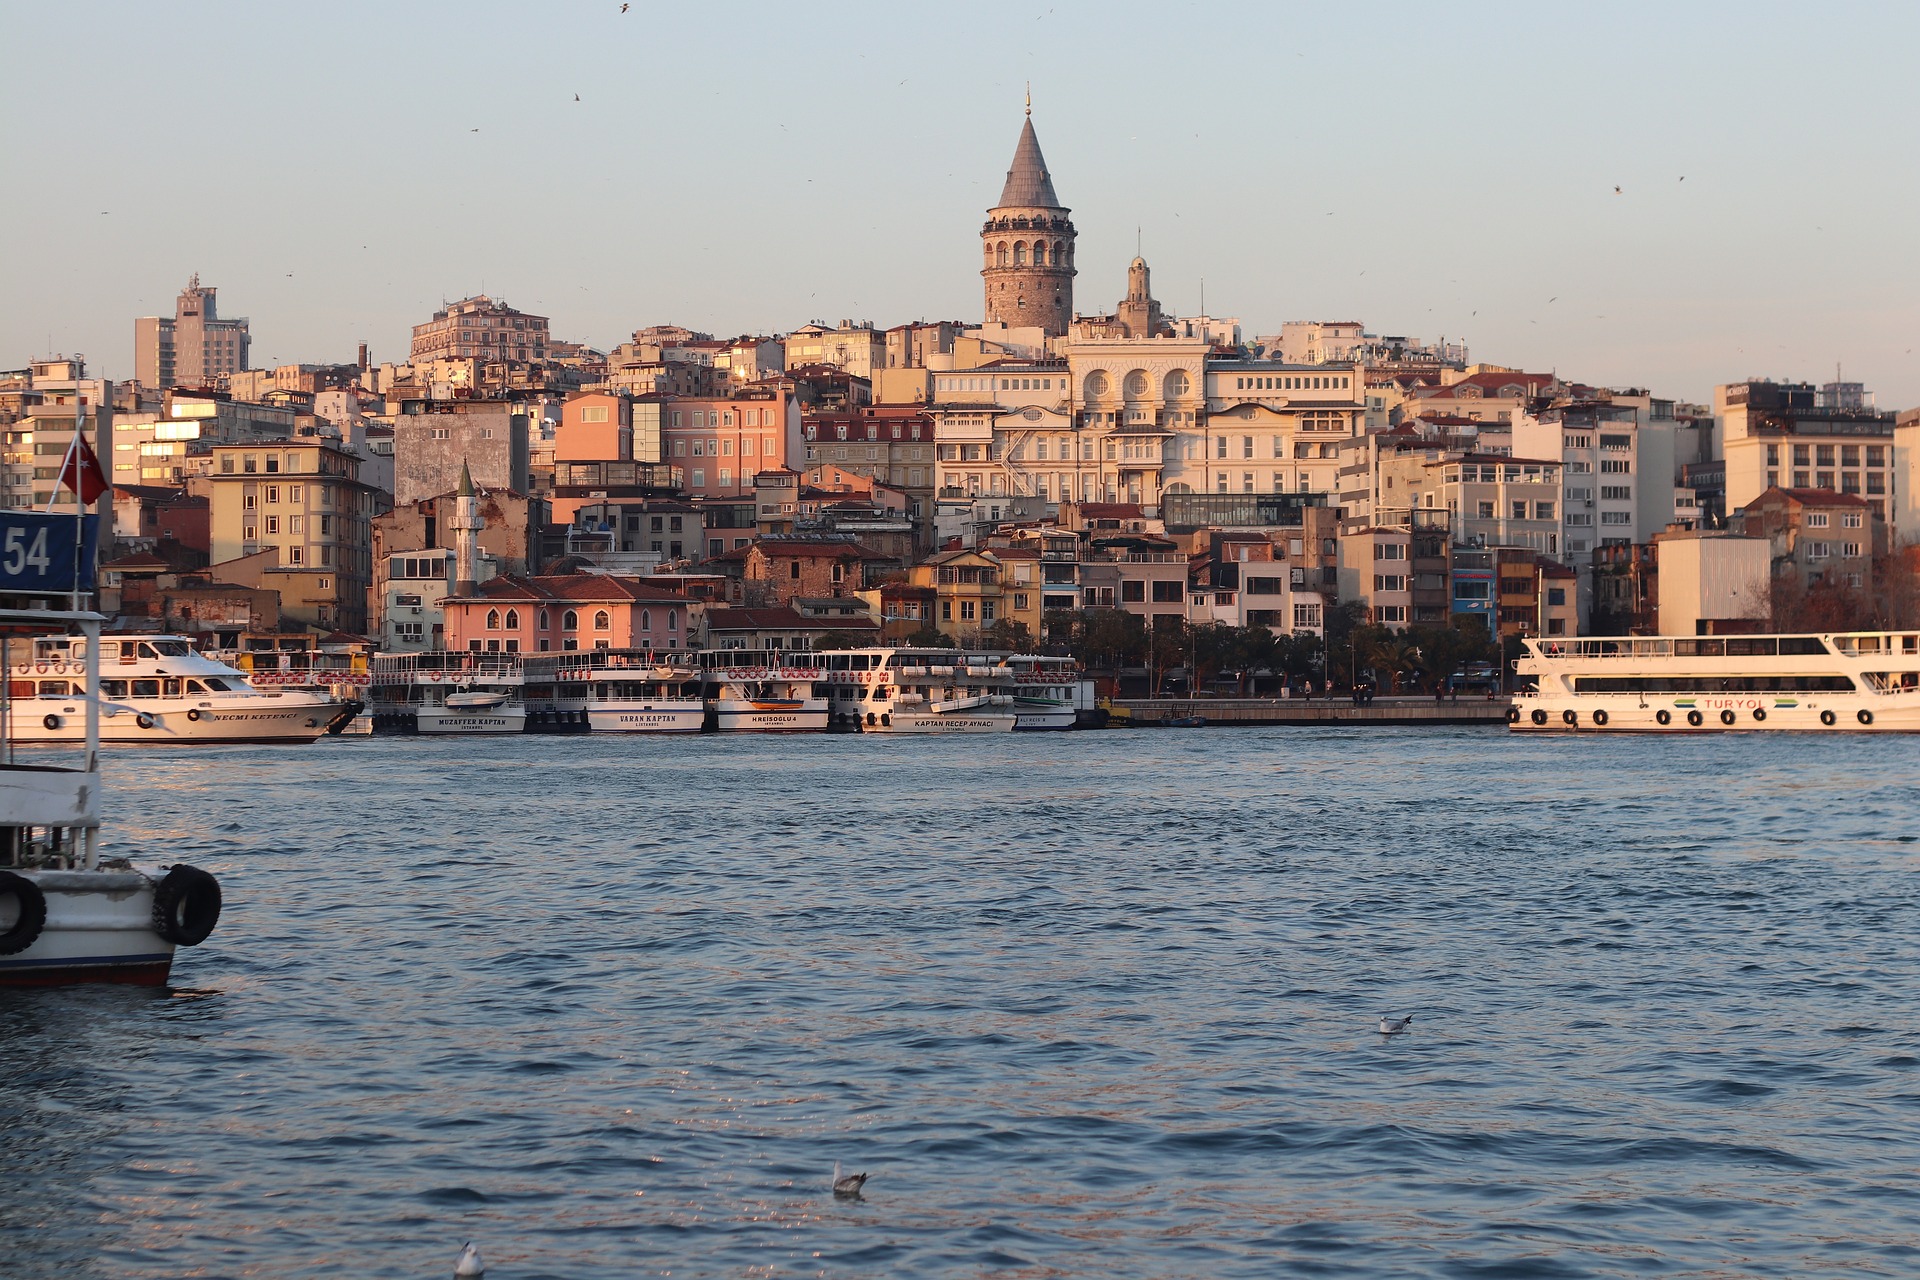 Many freelancers consider living in Turkey due to the high level of life quality and affordable community